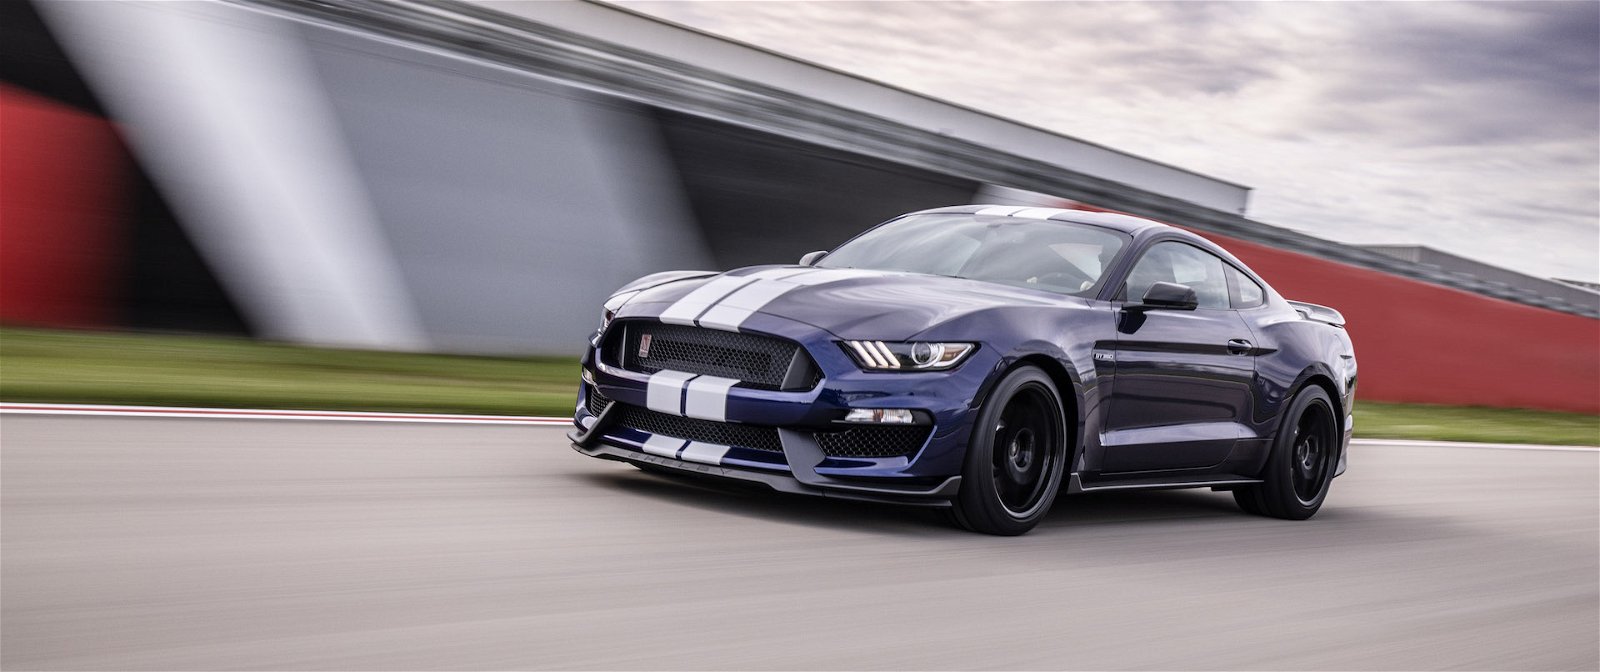 2019 mustang shelby gt350 1